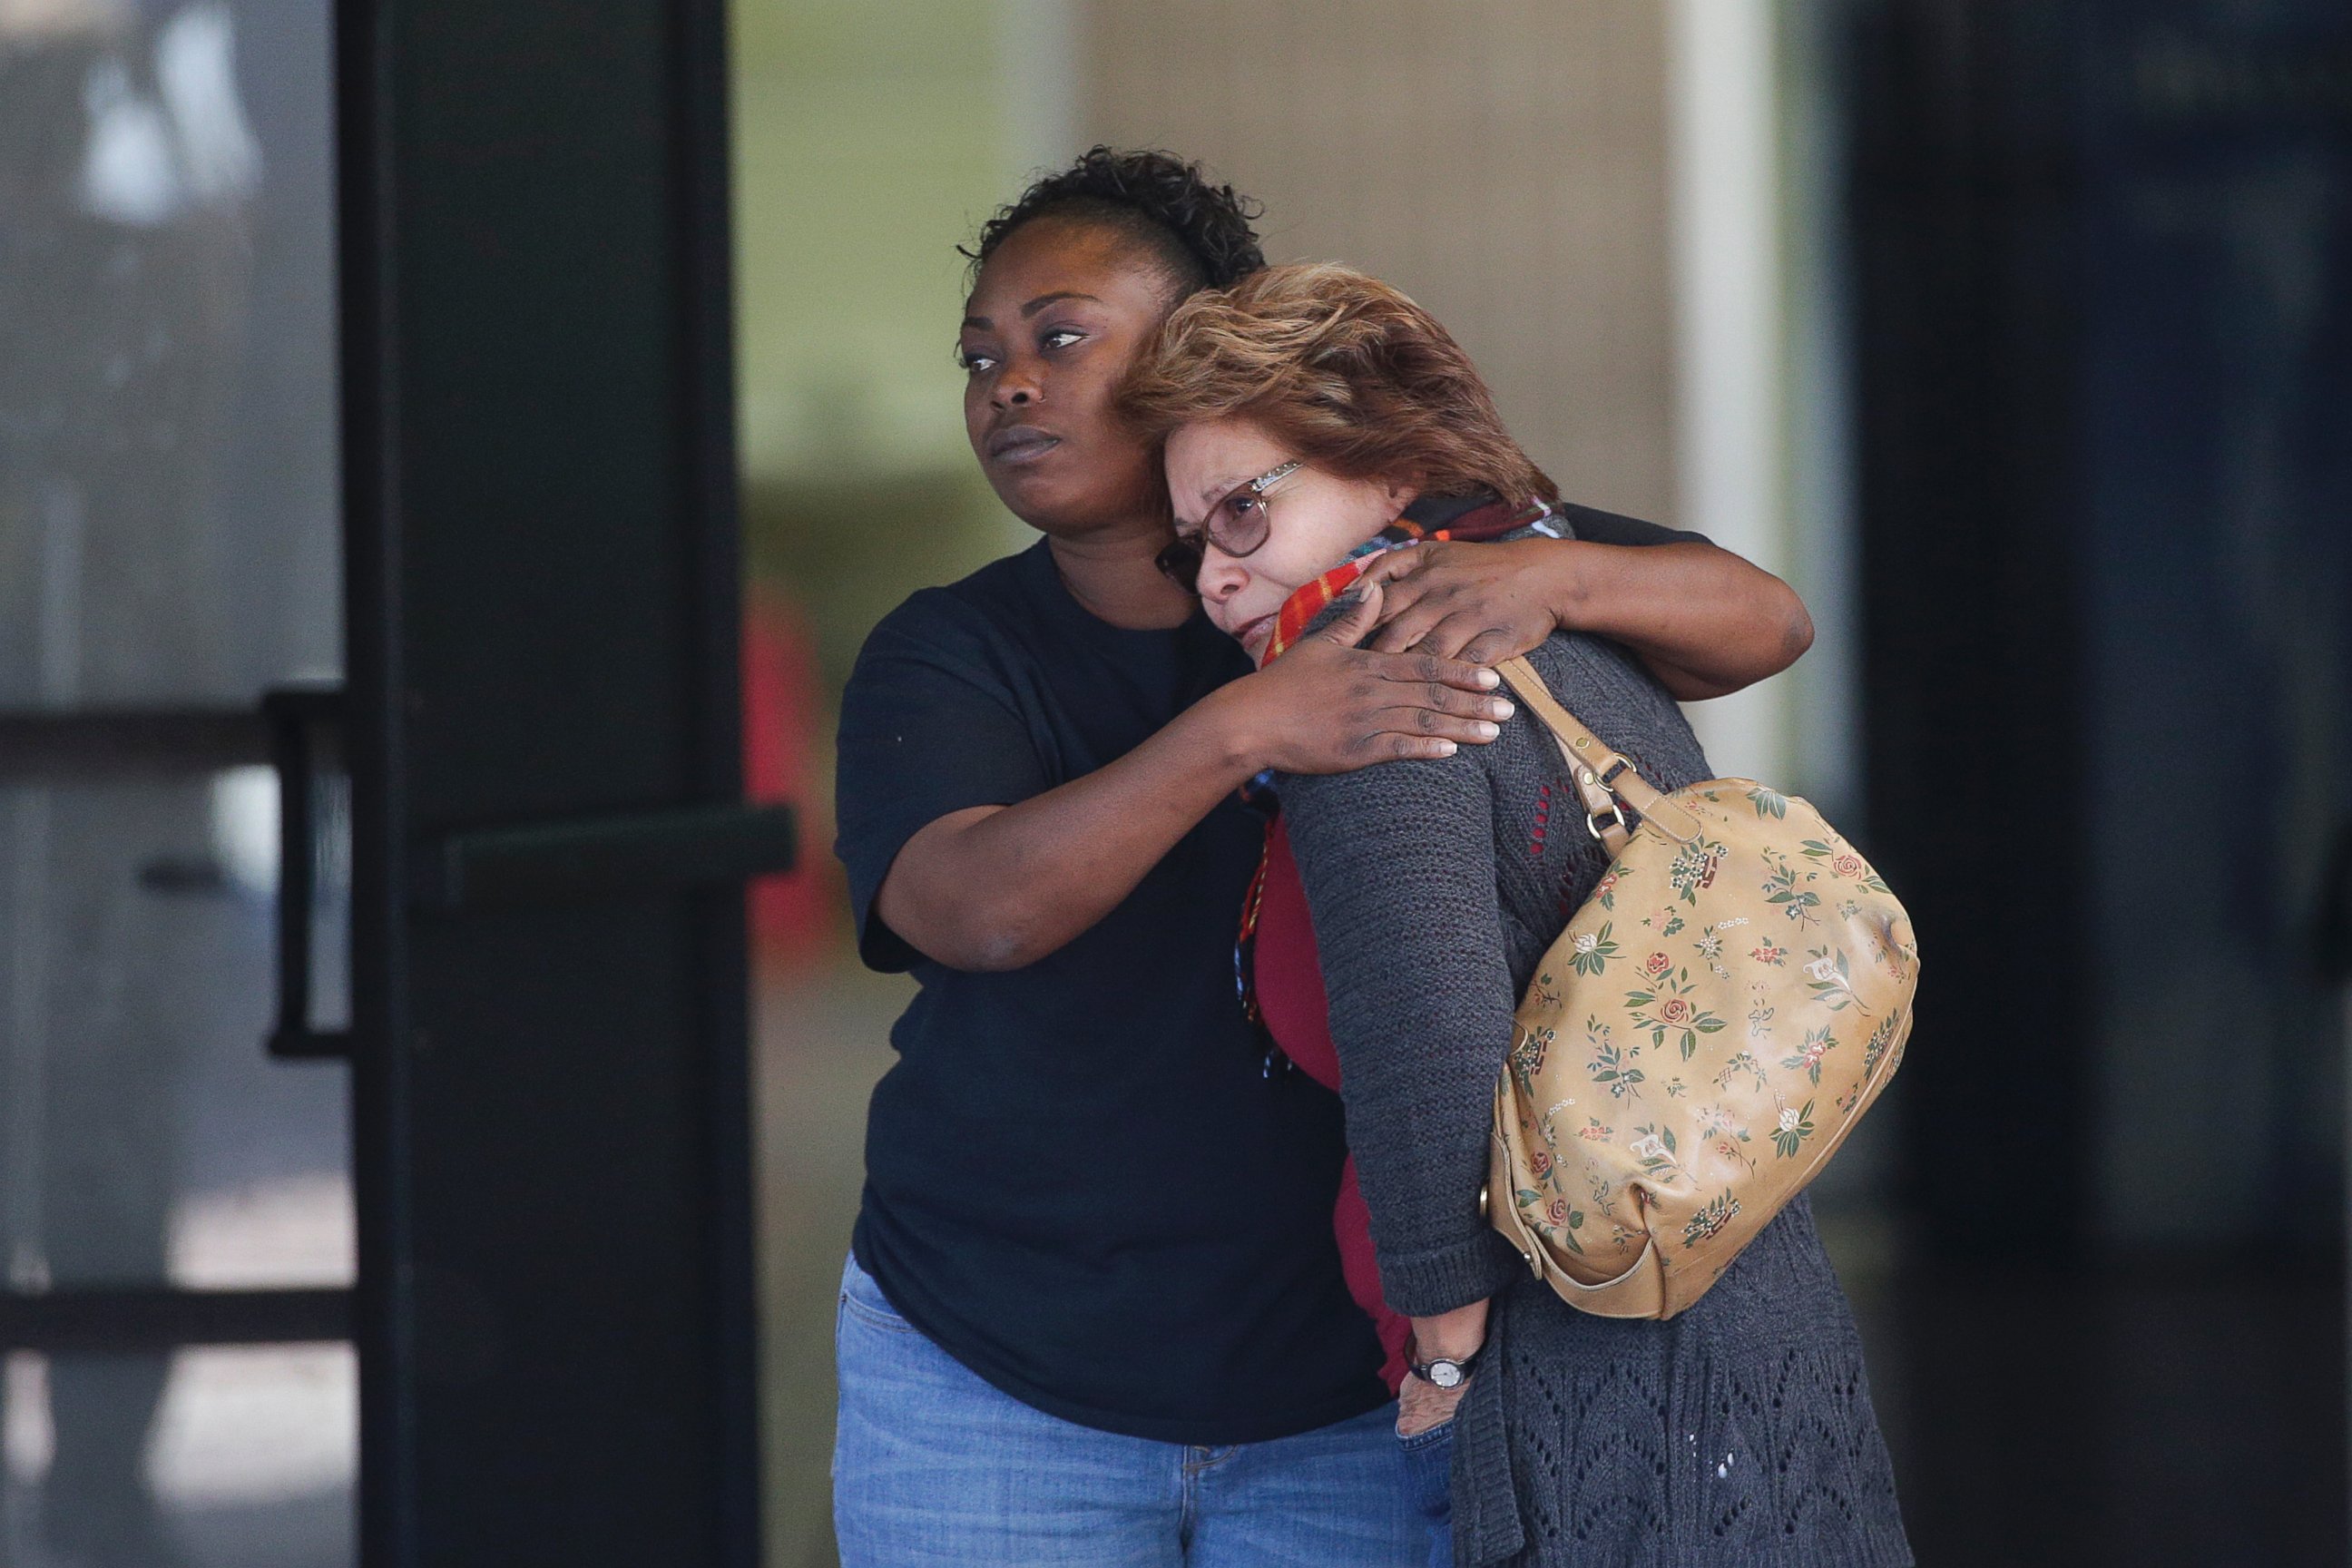 PHOTO: Two women embrace at a community center where family members are gathering to pick up survivors after a shooting rampage that killed multiple people and wounded others at a social services center in San Bernardino, Calif., Dec. 2, 2015. 